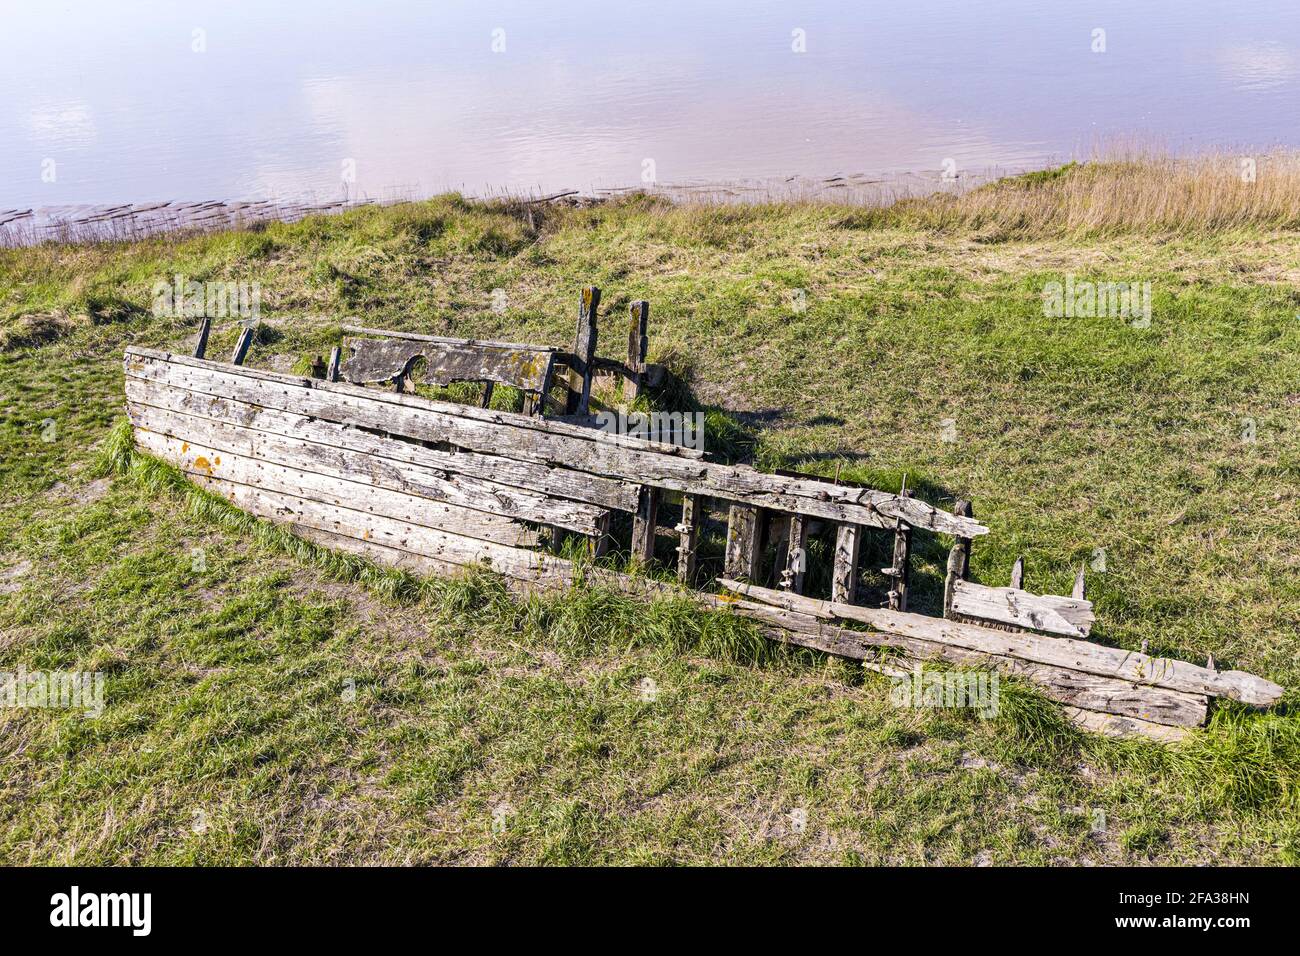 Remains of The Severn Collier, one of many such vessels deliberately beached on the banks of the River Severn to prevent erosion at The Purton Hulks. Stock Photo